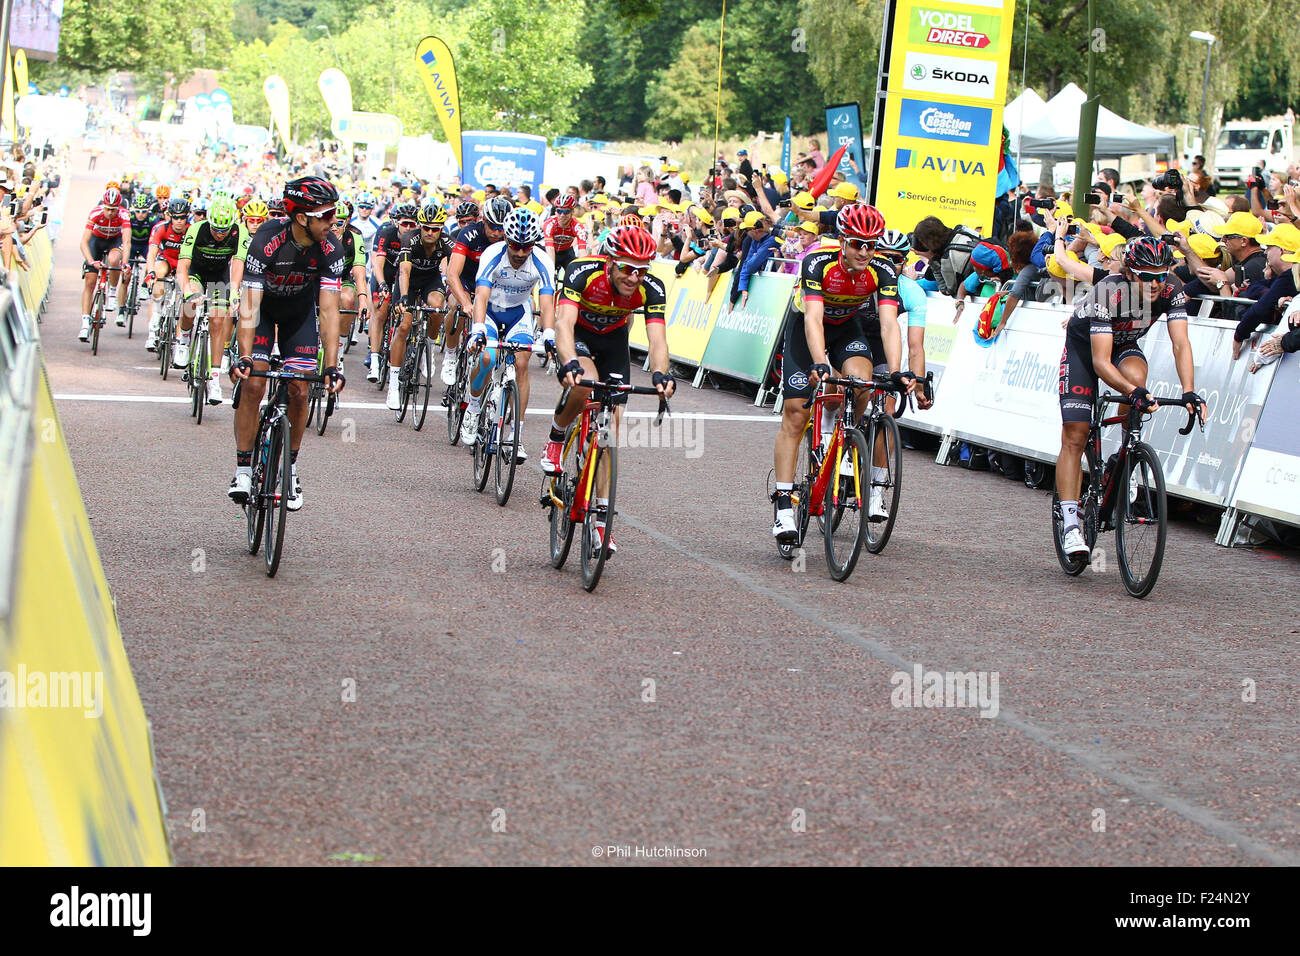 Stoke, UK. 11th Sep, 2015. Tour Of Britain Stage Six. Stoke to Nottingham. The main peloton arrived 45 minutes after the winner and were led into Nottingham by the Raleigh GAC and the Cult Energy Pro Cycling teams. © Action Plus Sports/Alamy Live News Stock Photo